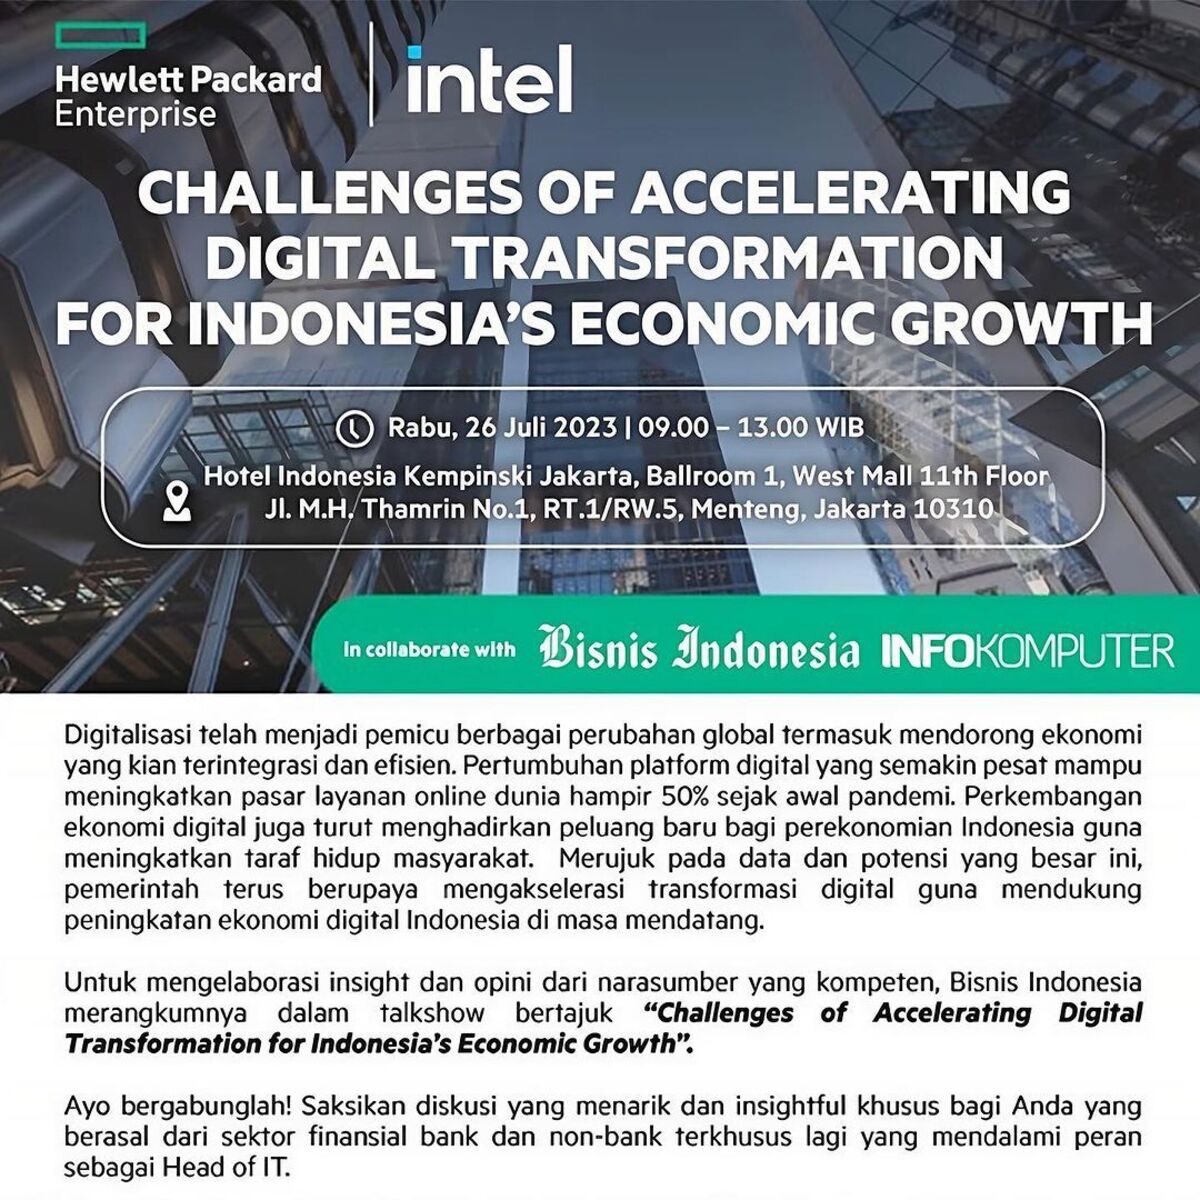 Challenges of Accelerating Digital Transformation for Indonesia's Economic Growth